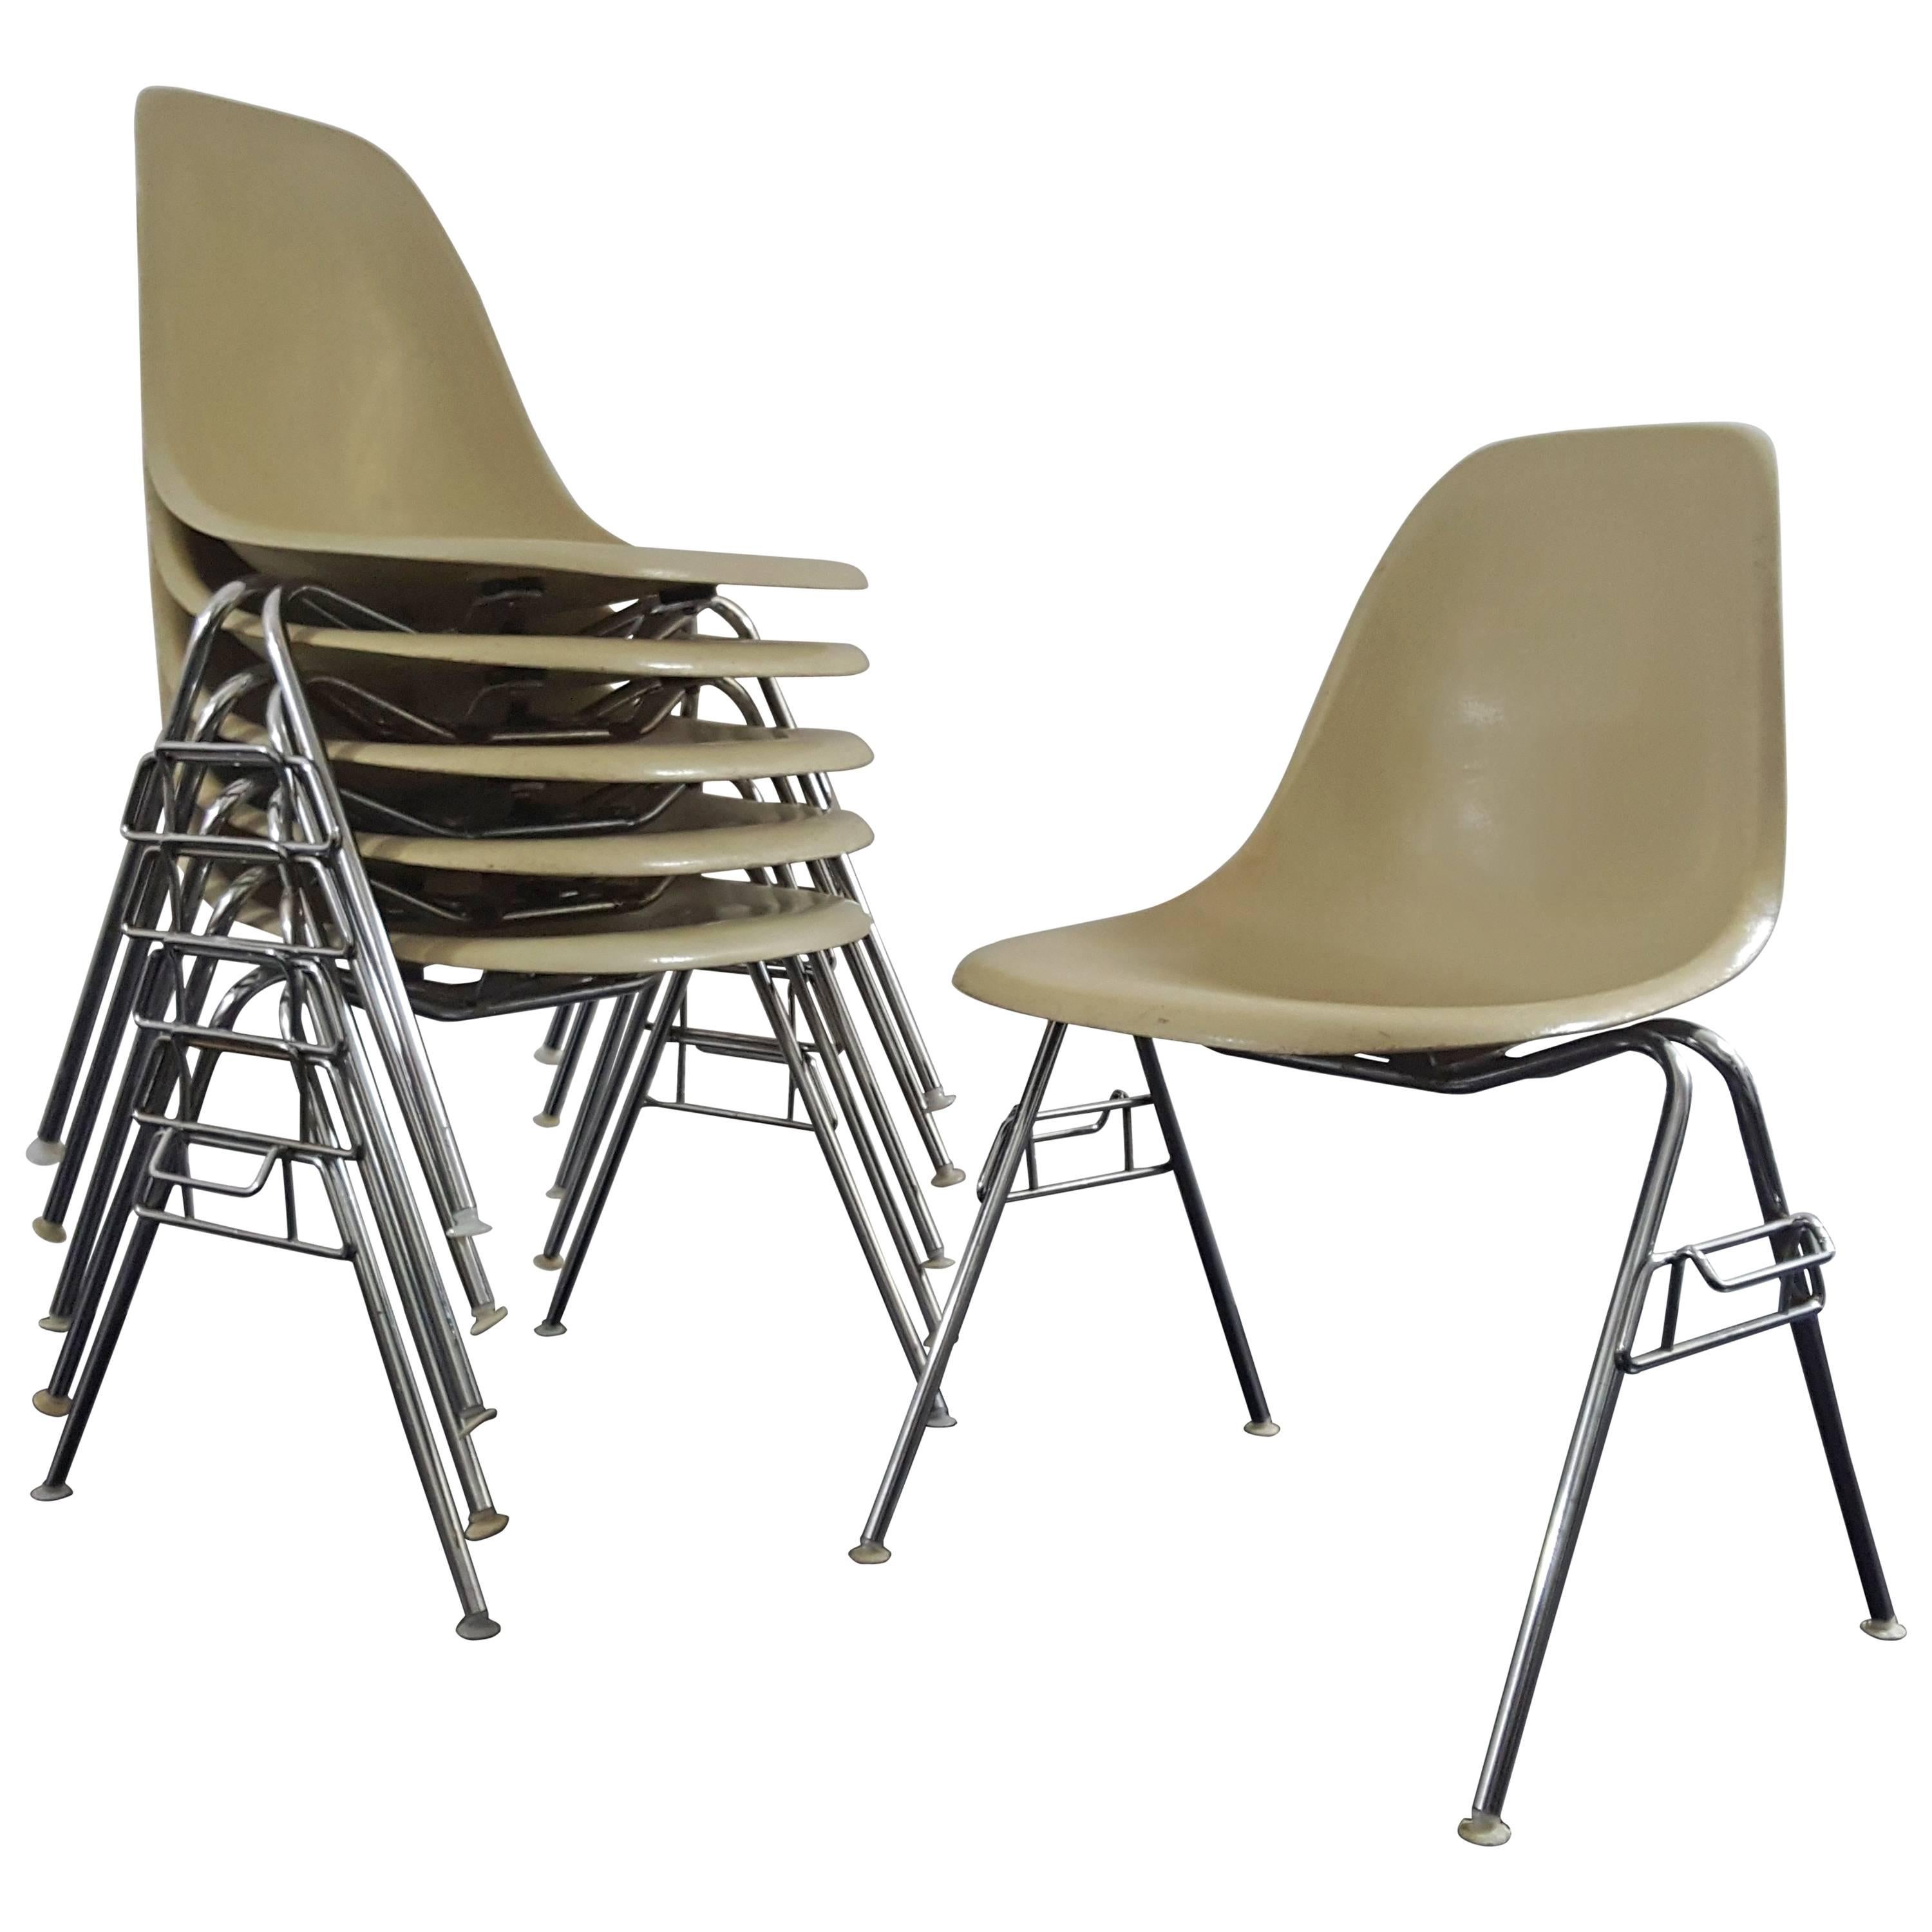 Original Vintage Charles & Ray Eames Dss Stacking Chairs for Herman Miller